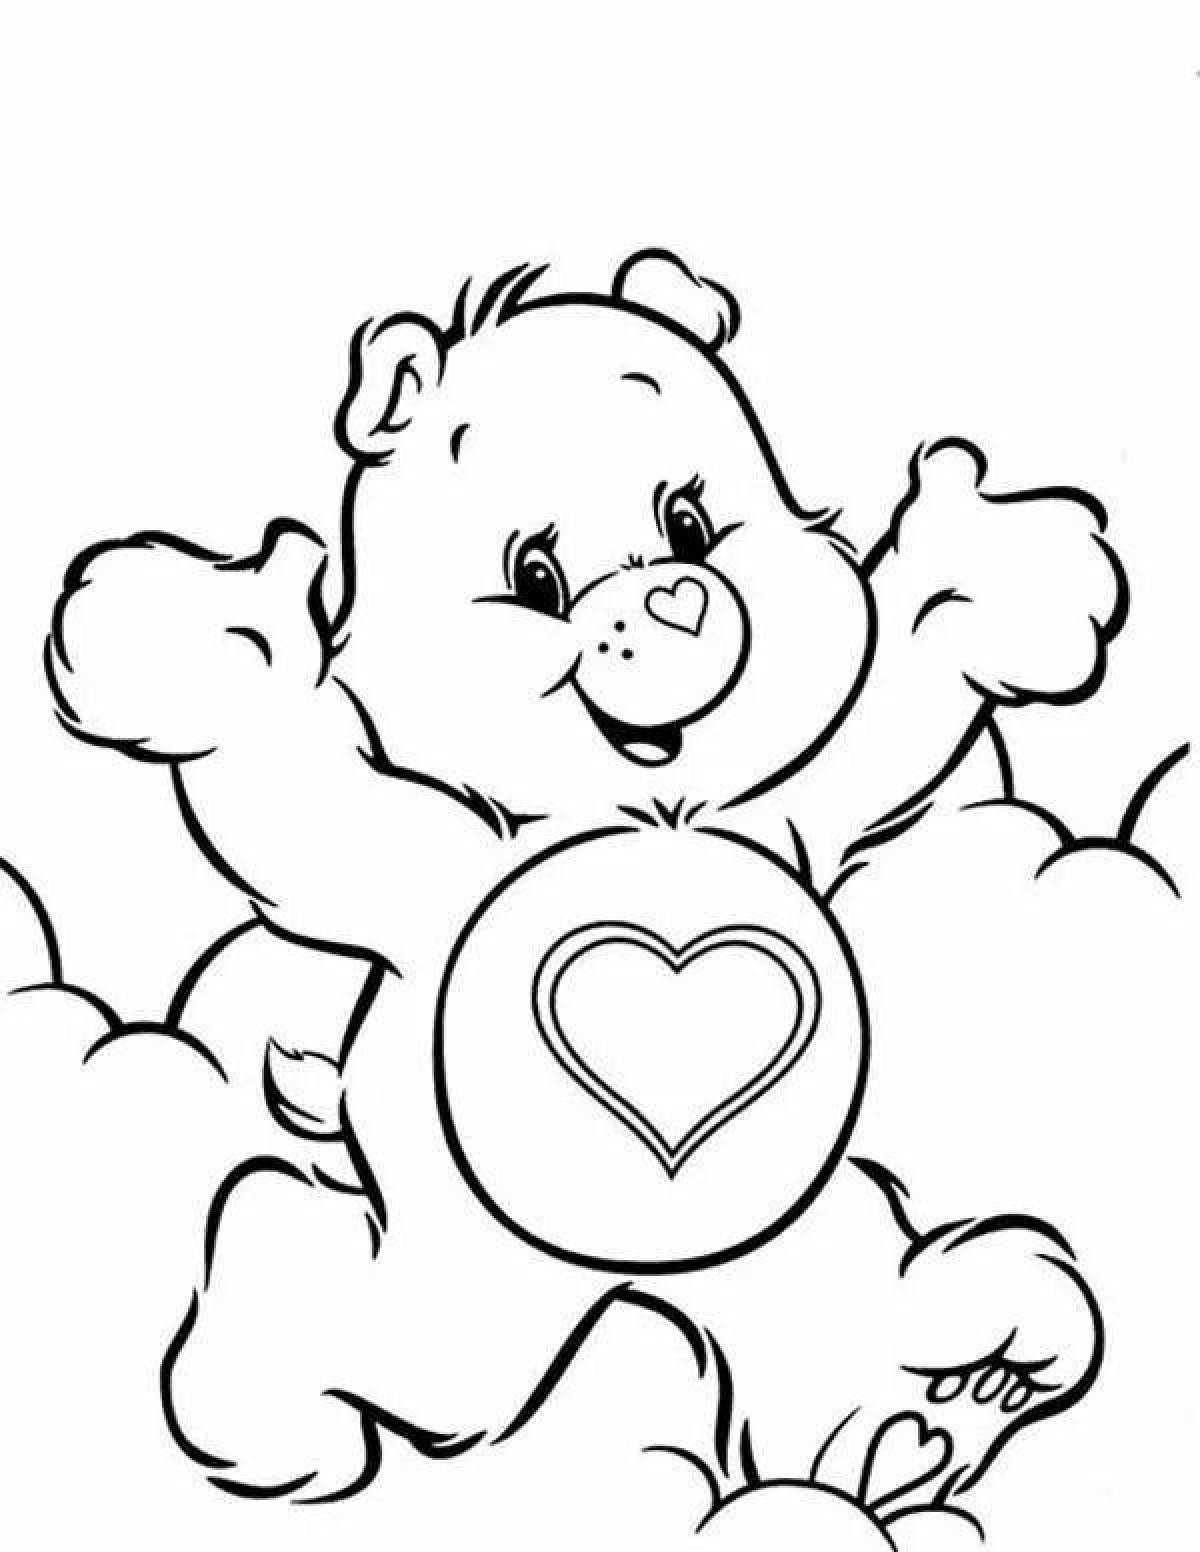 Coloring page magic bear with a heart